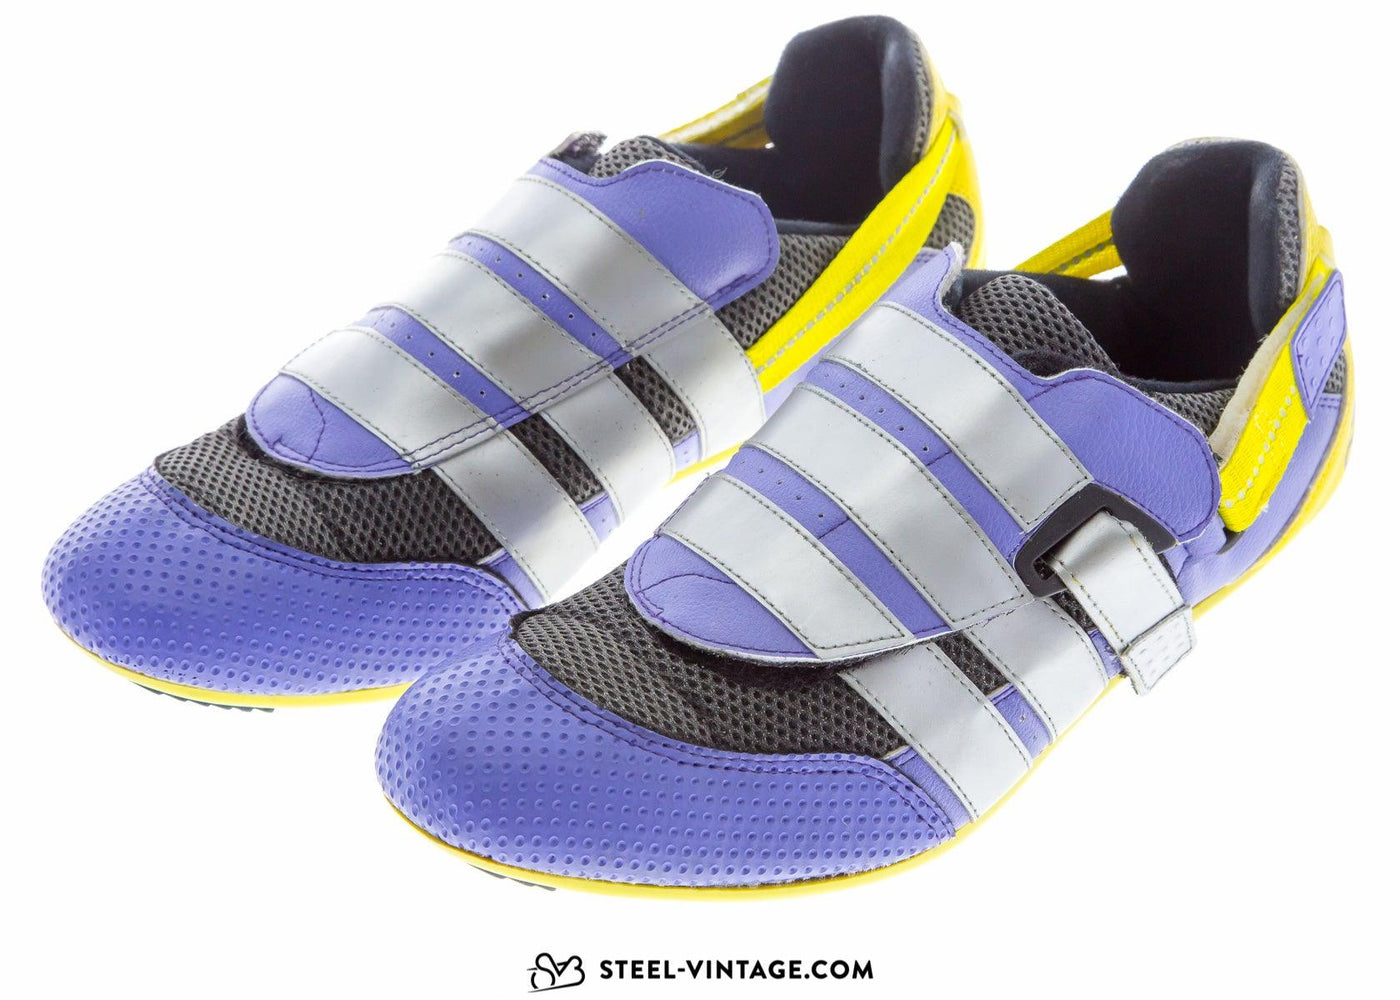 Adidas Bassano Purple Yellow Cycling Shoes NOS 42 - Steel Vintage Bikes